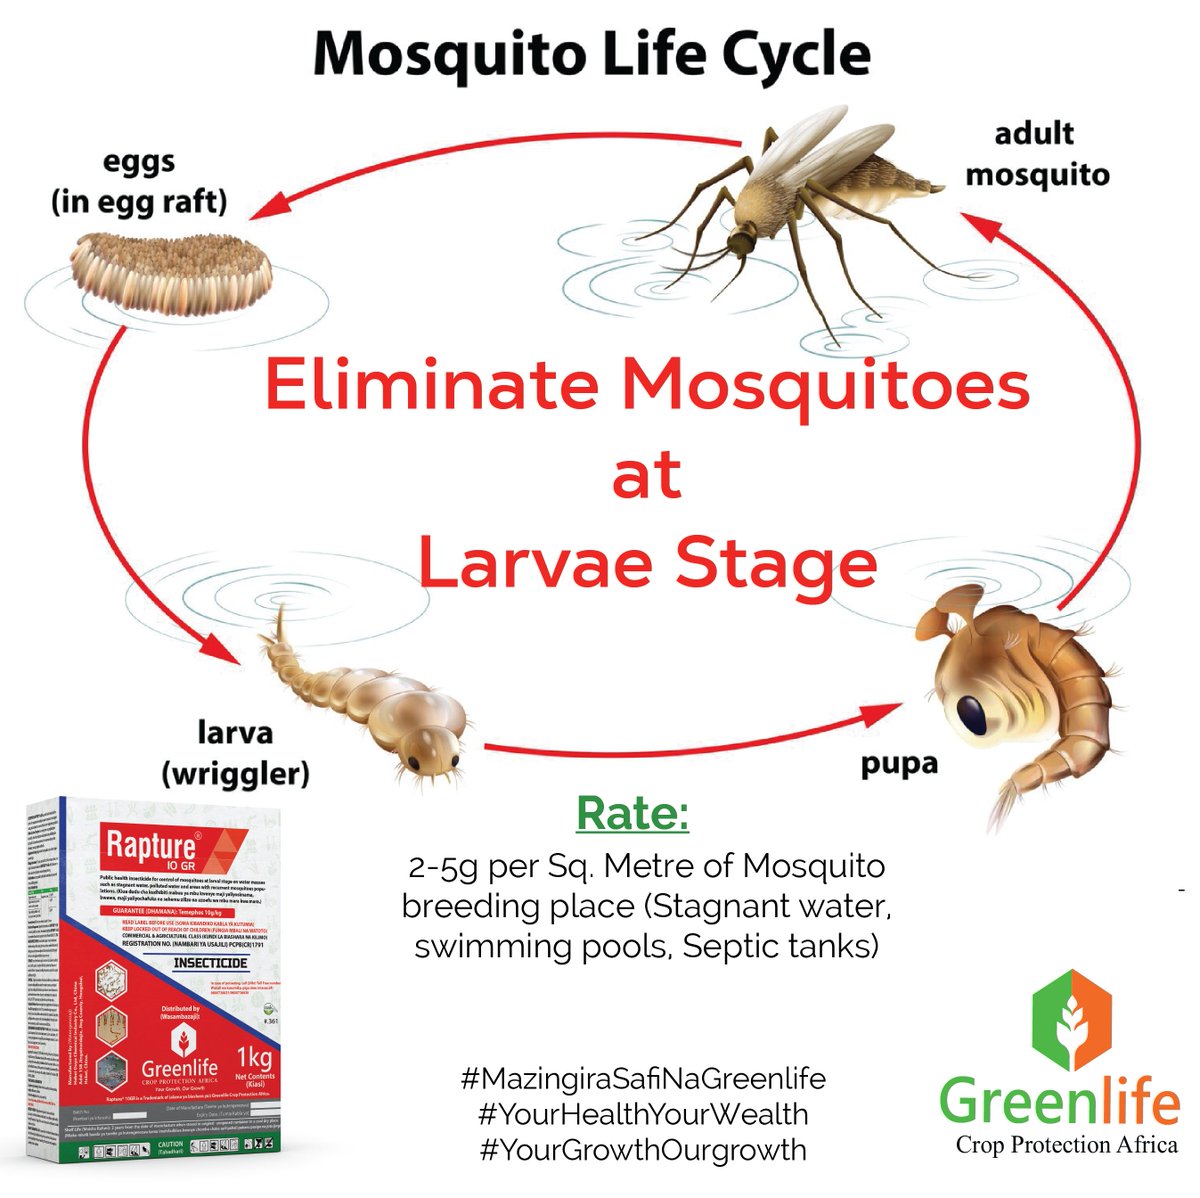 Get Rid of Stagnant Water Today!! Use Rapture 10 GR to treat all stagnant water and eliminate mosquitoes at Larvae stage Call us free 0800721495 to get it now. #MazingiraSafiNaGreenlife #YourGrowthOurGrowth